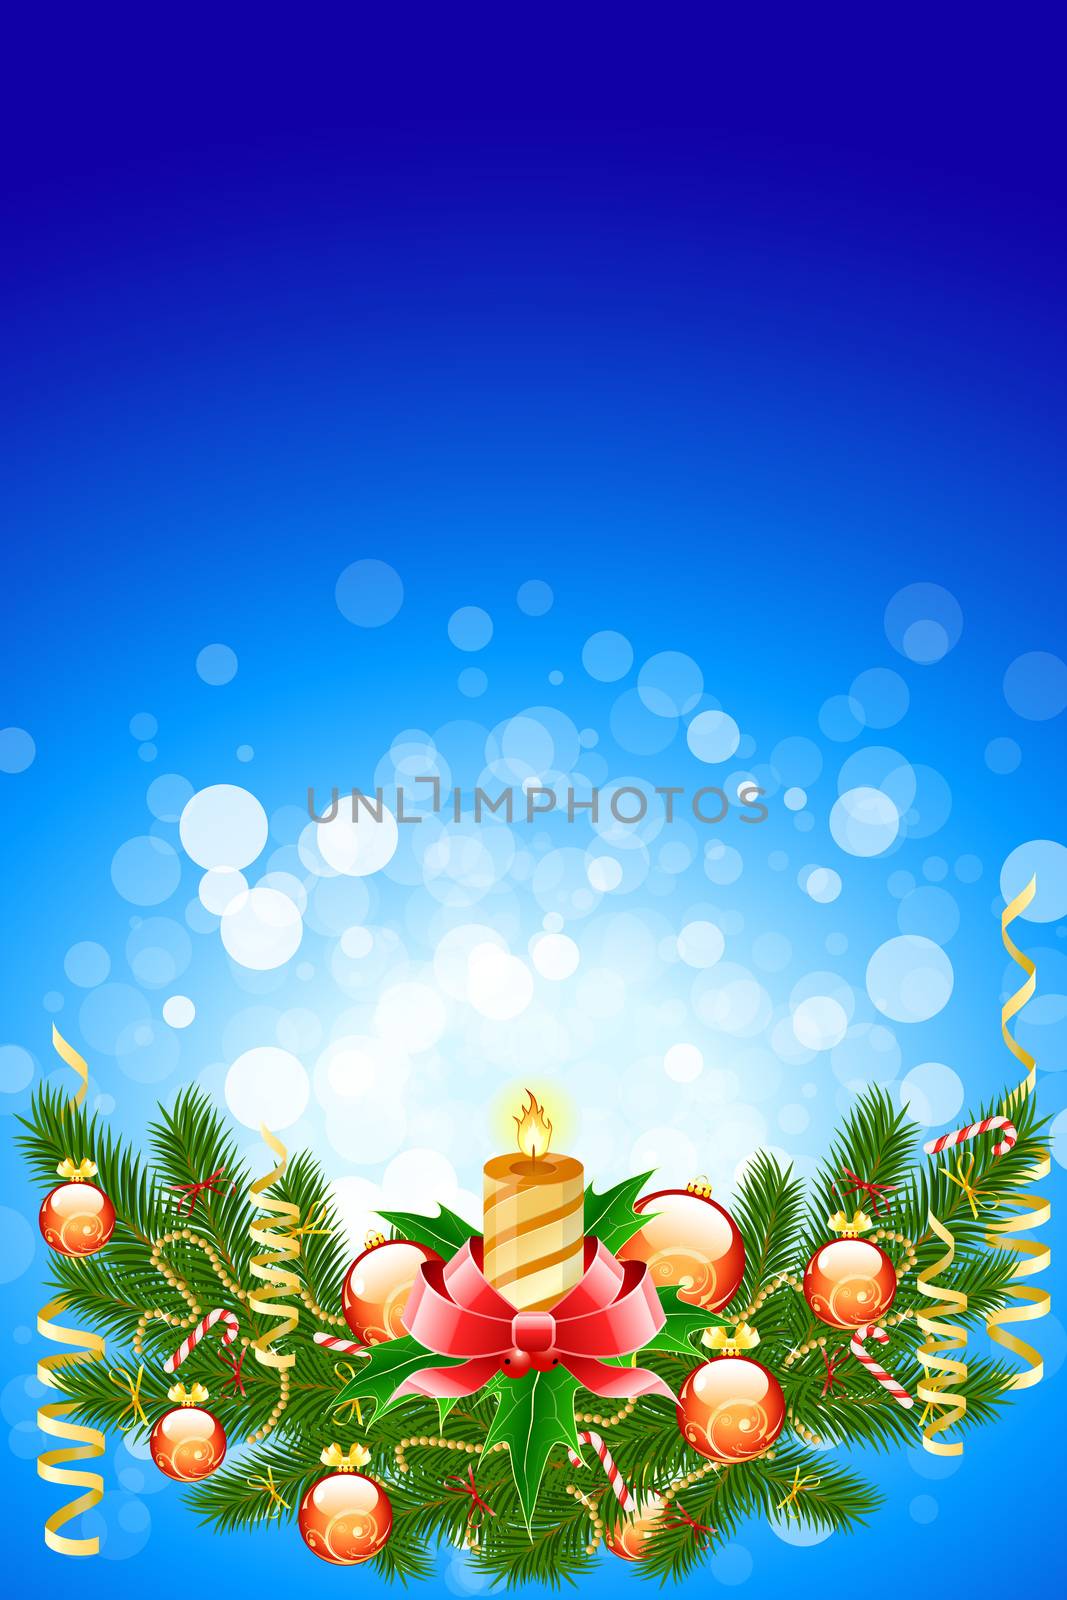 Illustration of christmas fir tree with candle and decoration on abstract blue background